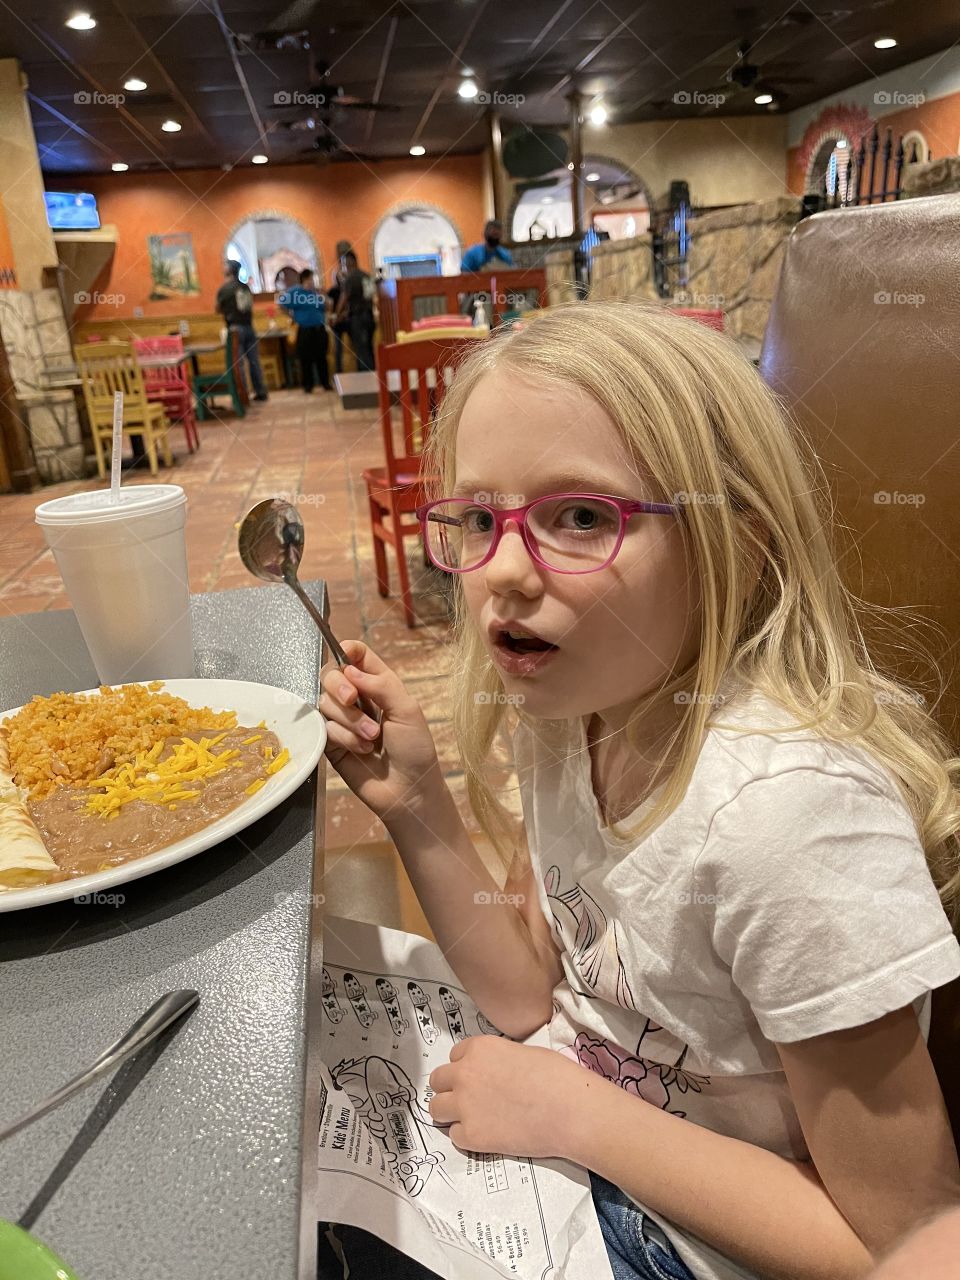 Little girl does not look happy about dinner